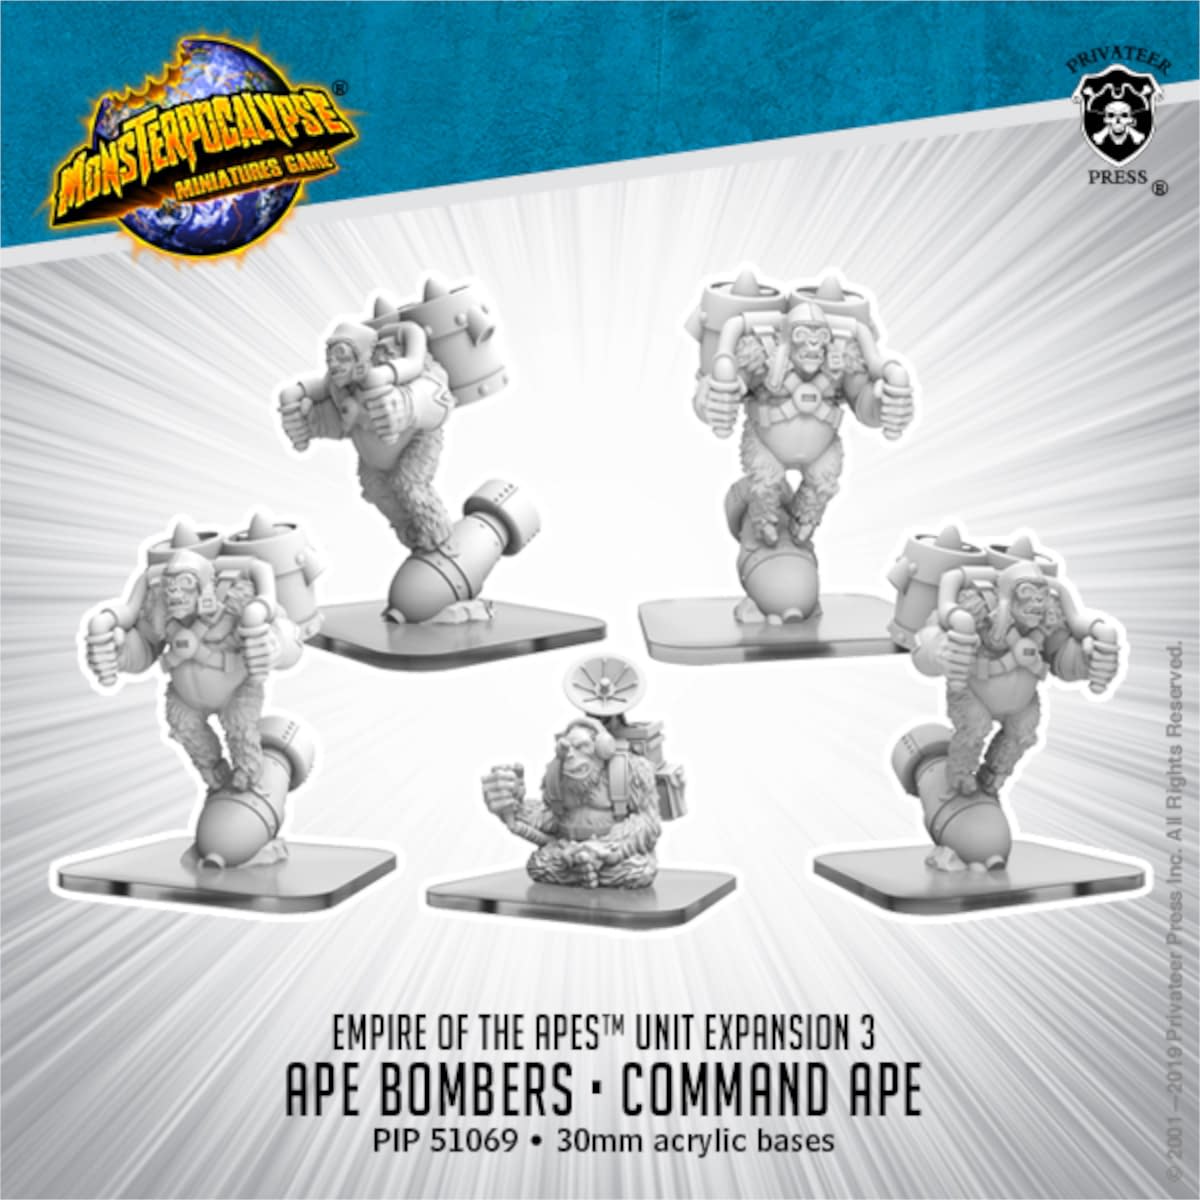 New "Monsterpocalypse" releases: Ulgoth, Apes, and Robots, Oh My!